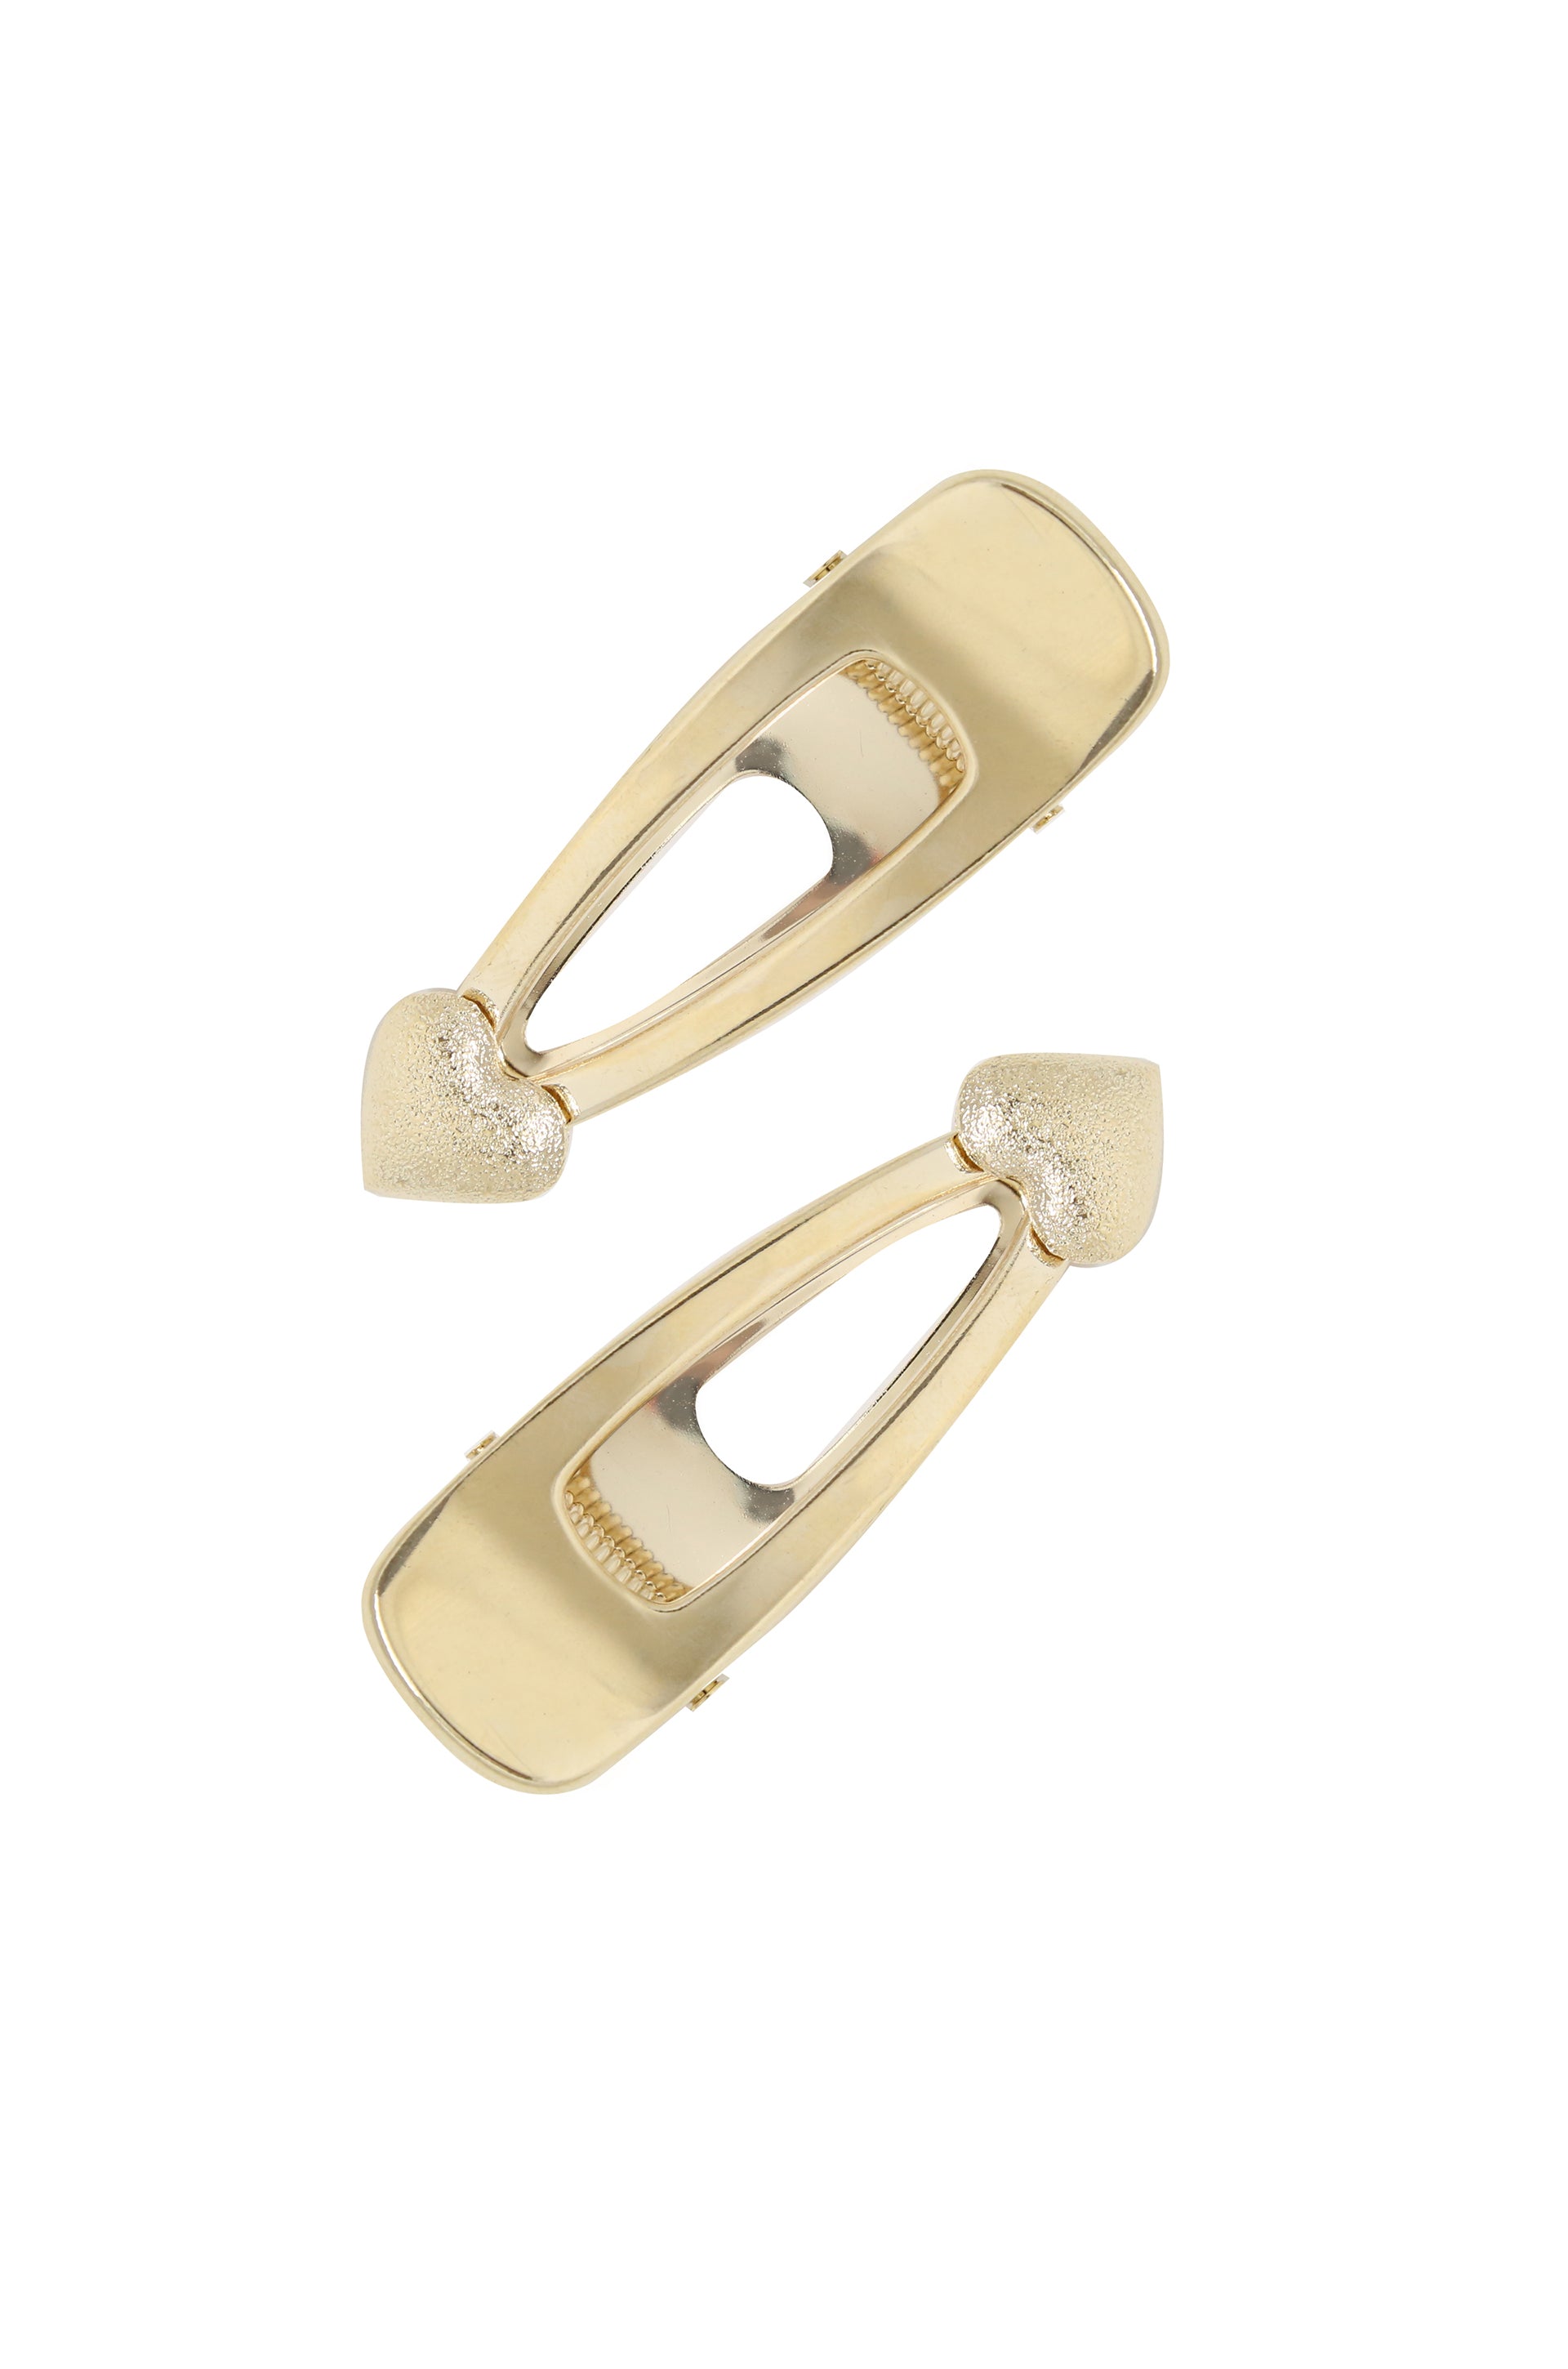 Double Love Clip Set in Gold on white background  